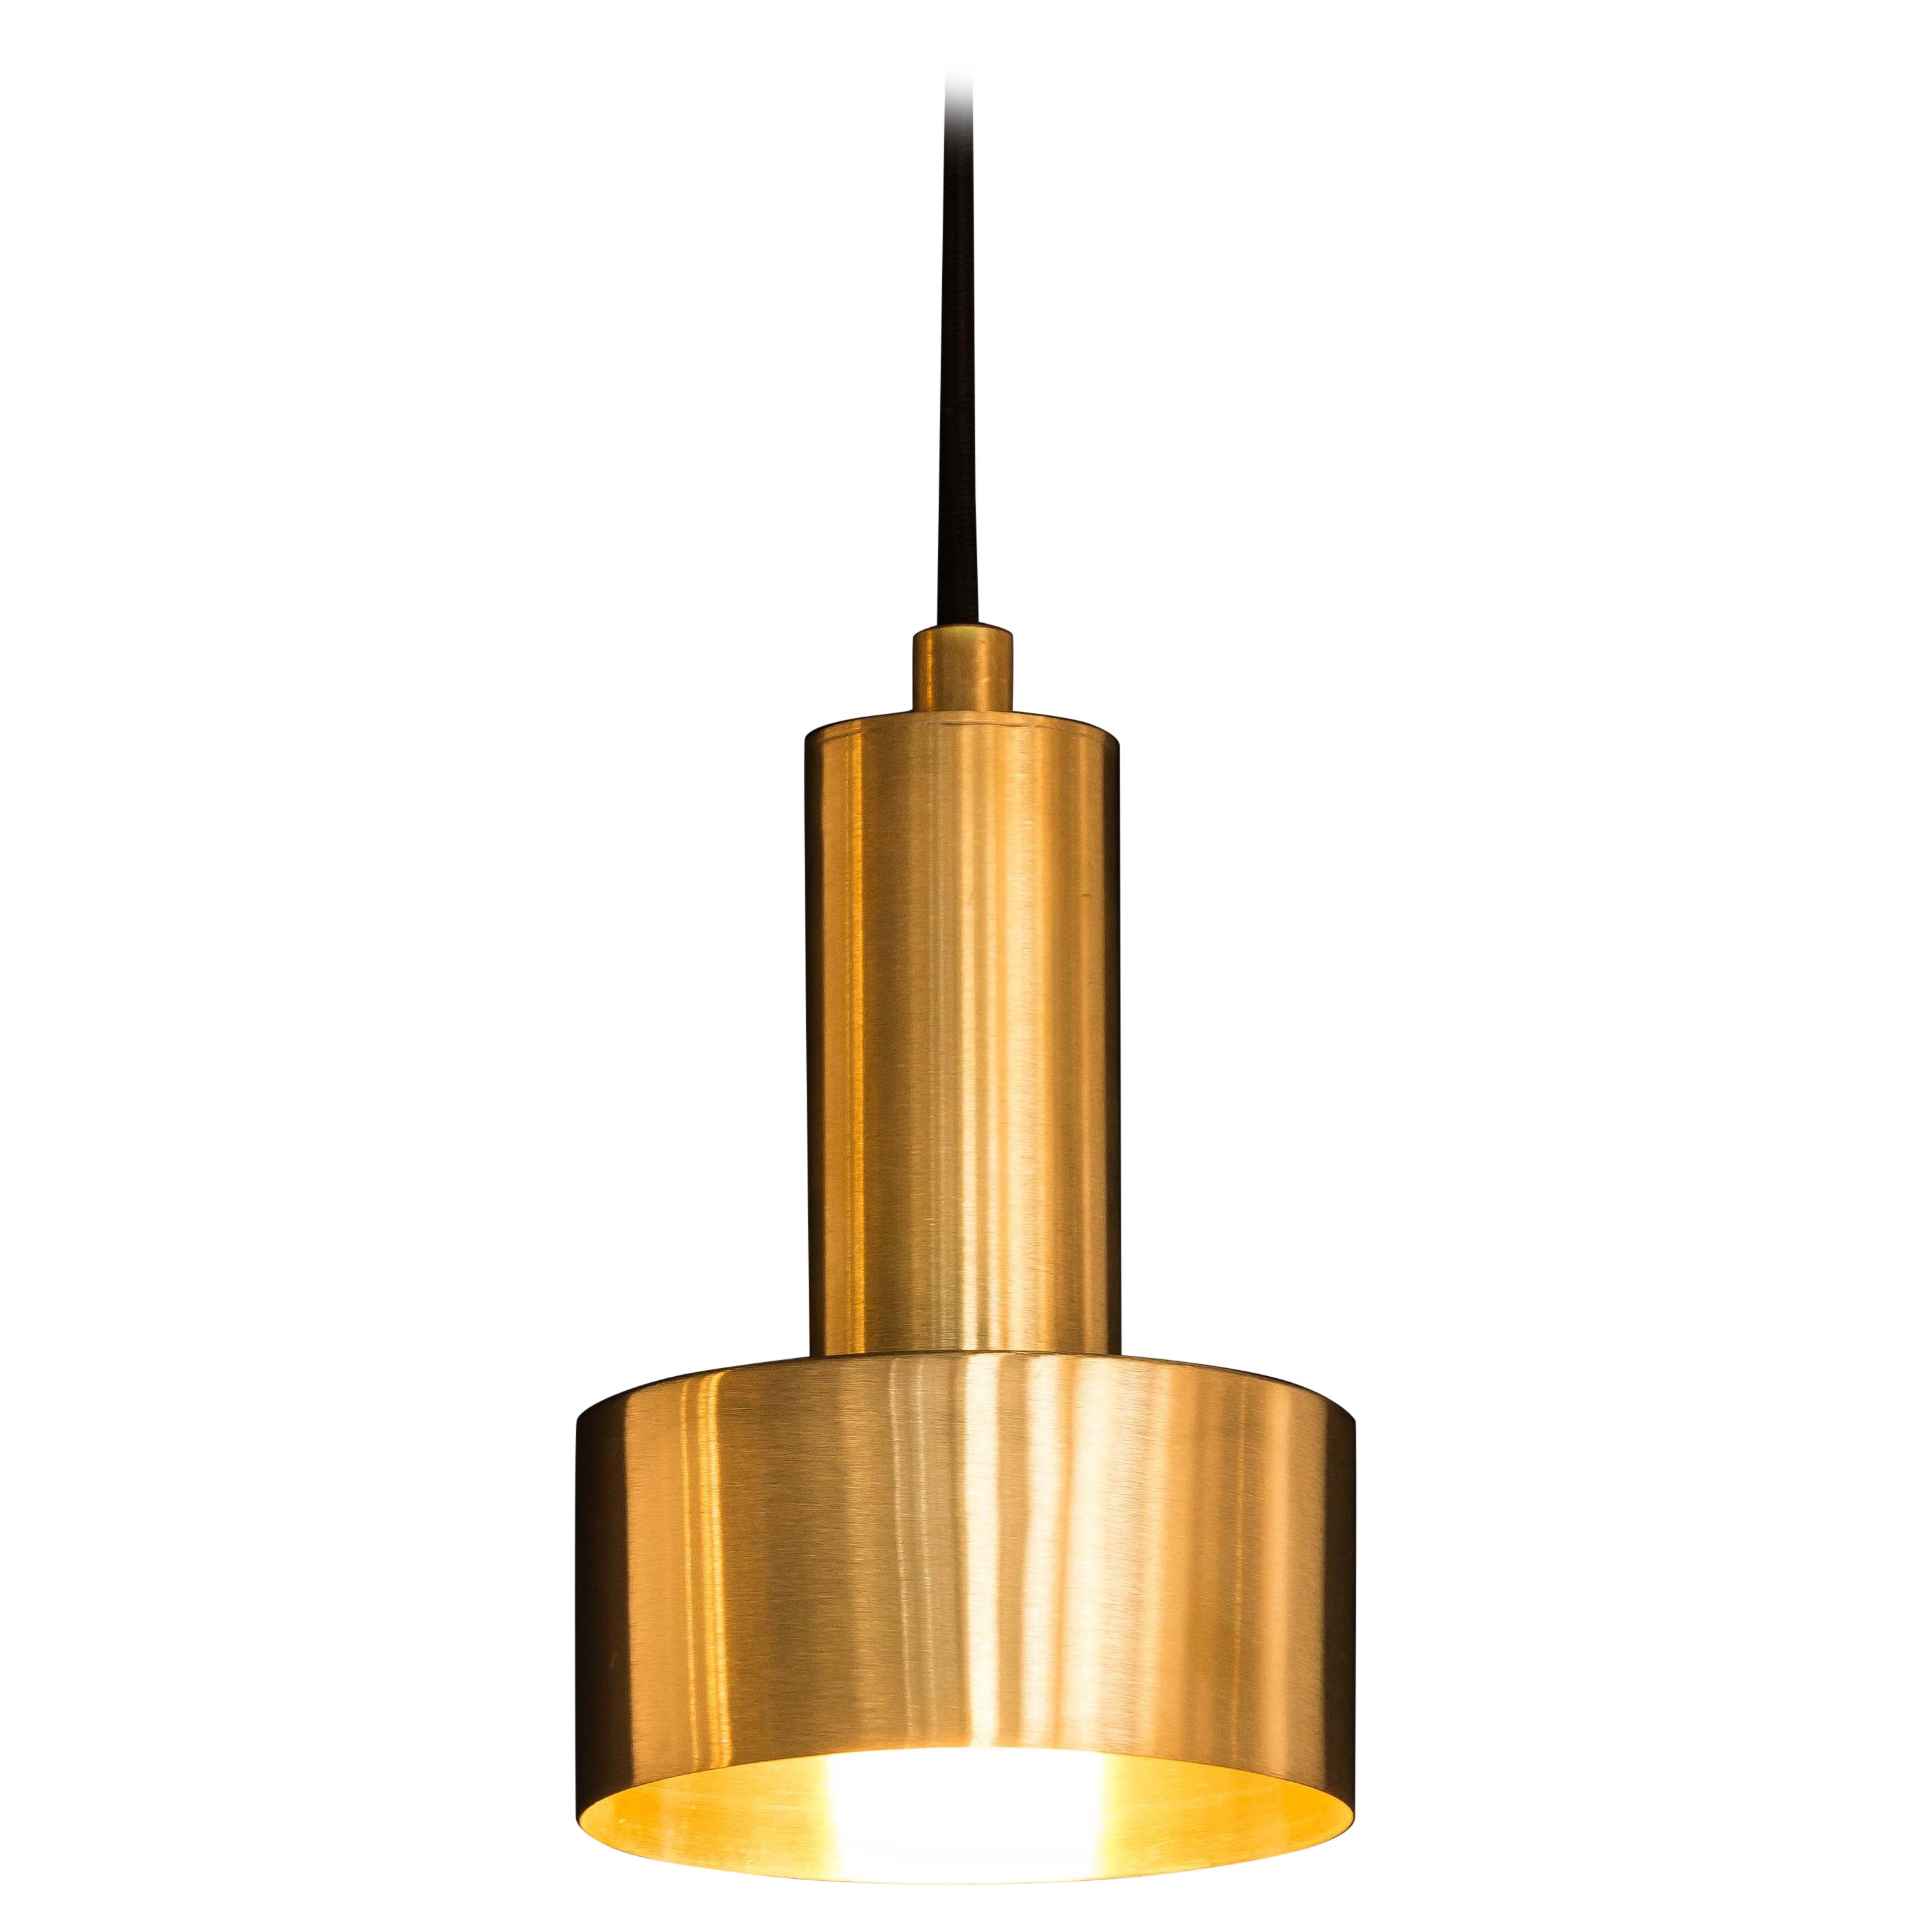 Contemporary-Modern Pendelleuchte aus Naturmessing Handcrafted in Italy by 247lab im Angebot